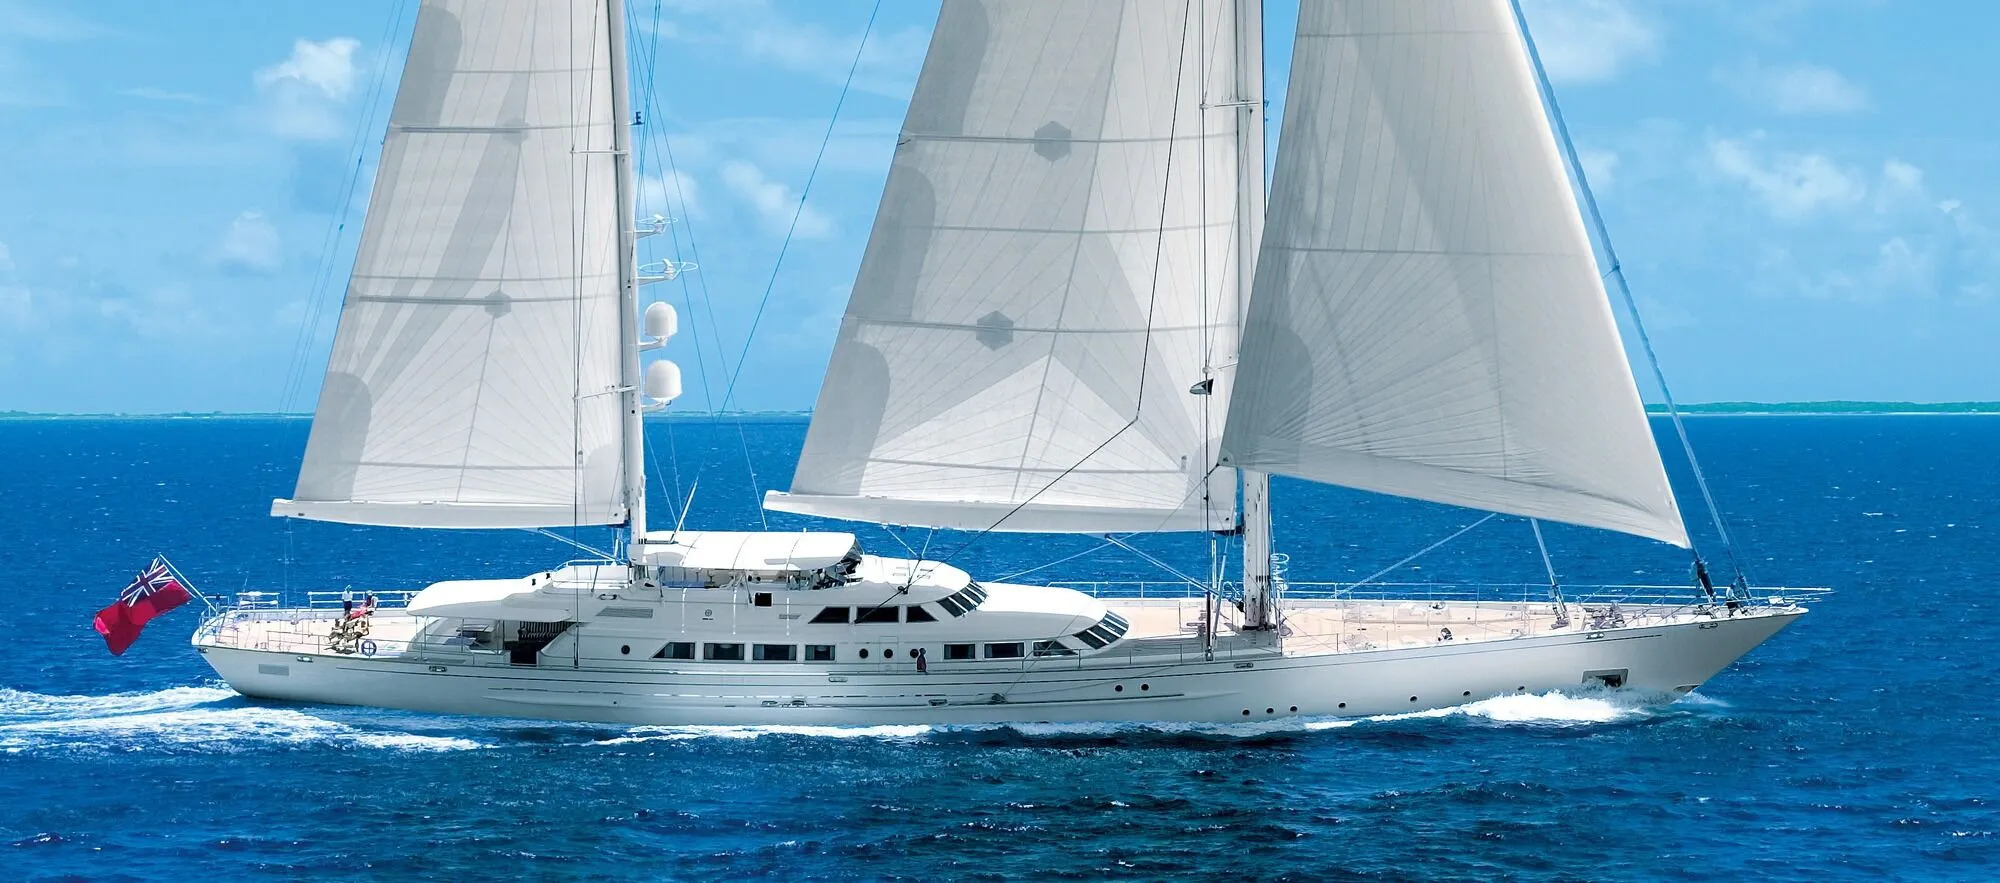 Saint Martin Yacht Charters & Sailing Vacations - Caribbeanyachtcharte,Palm Beach Gardens,Tours & Travels,Tour Package,77traders